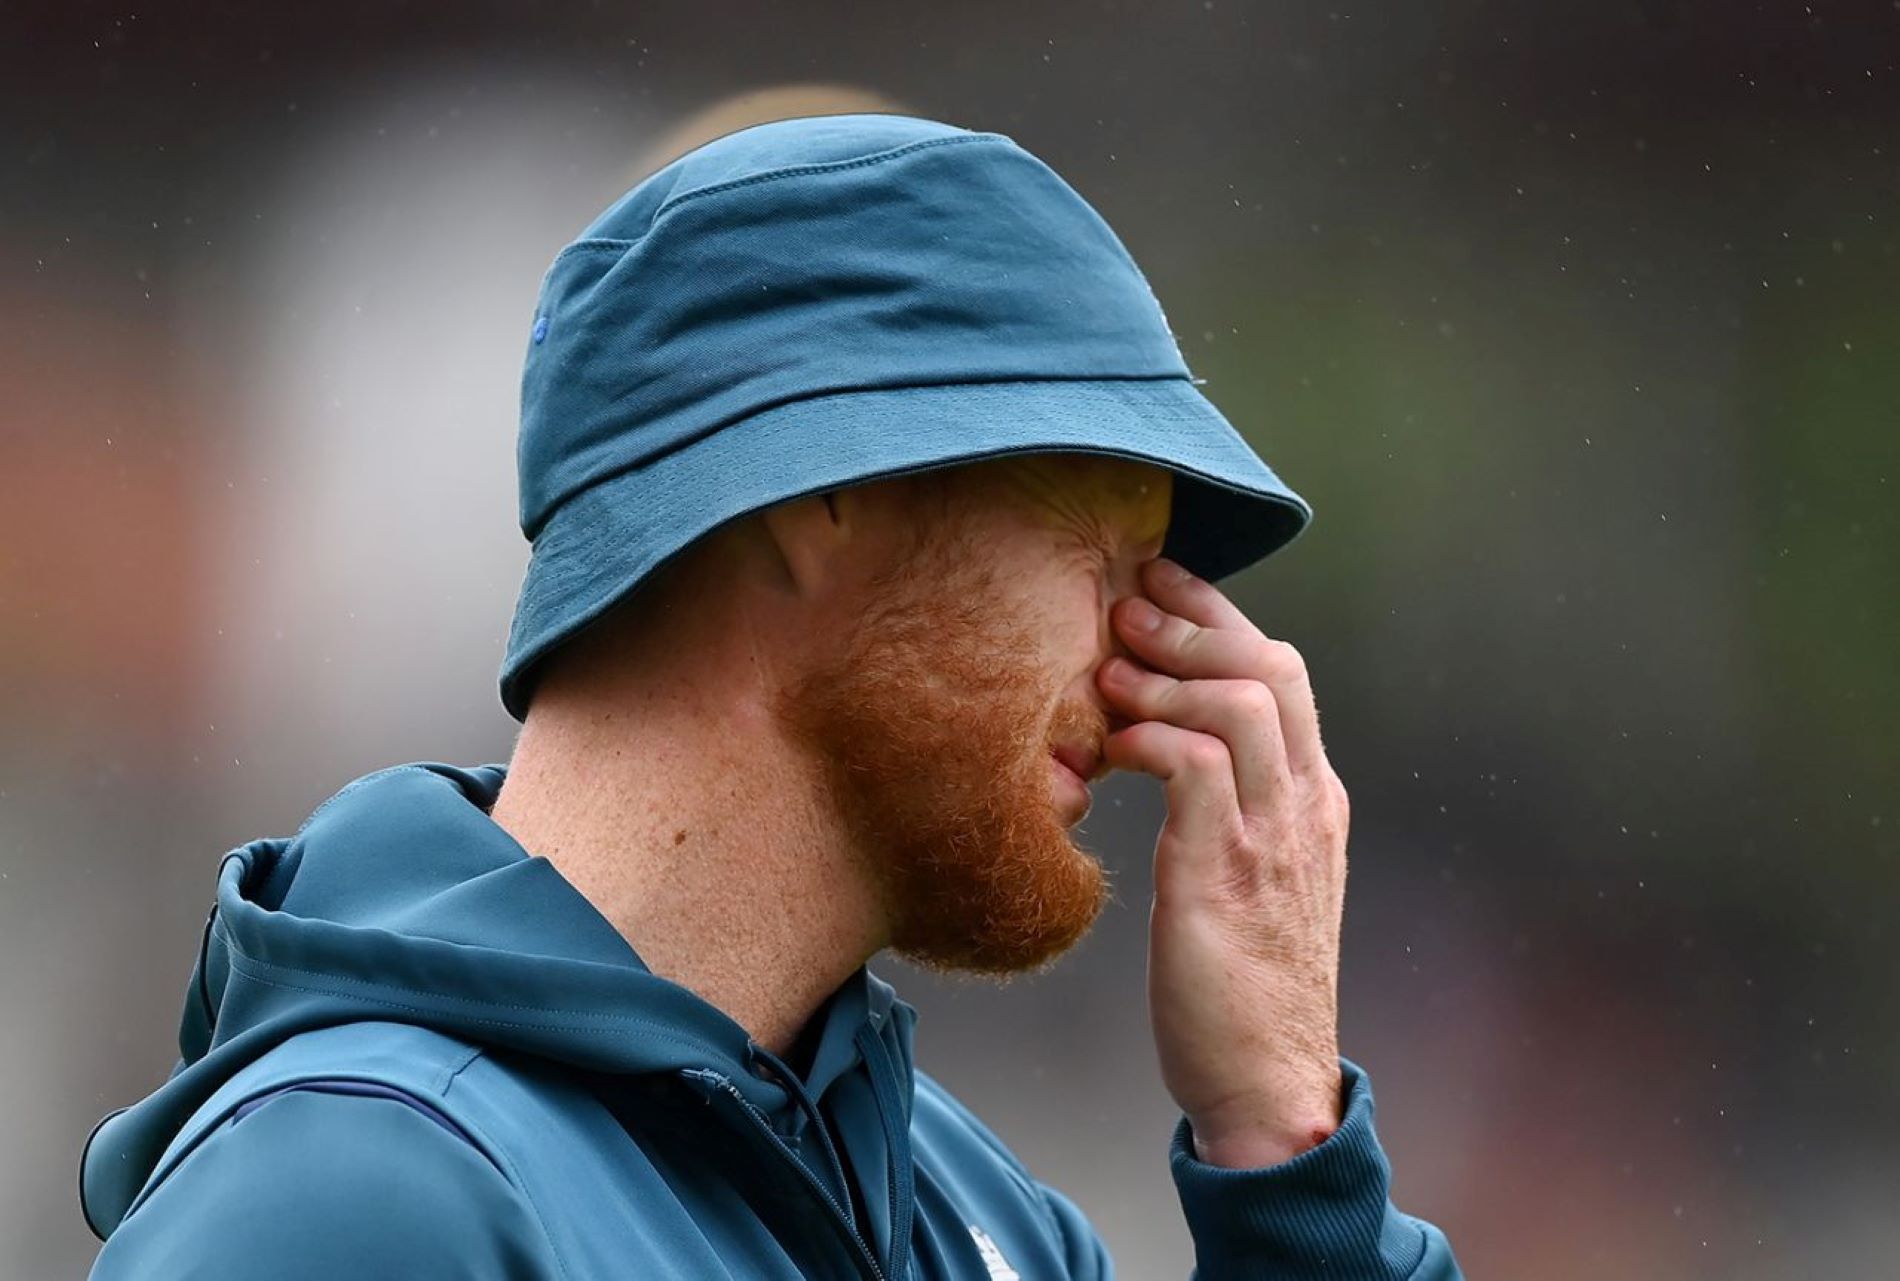 England fell into a 0-2 deficit after tough defeats at Edgbaston and Lord